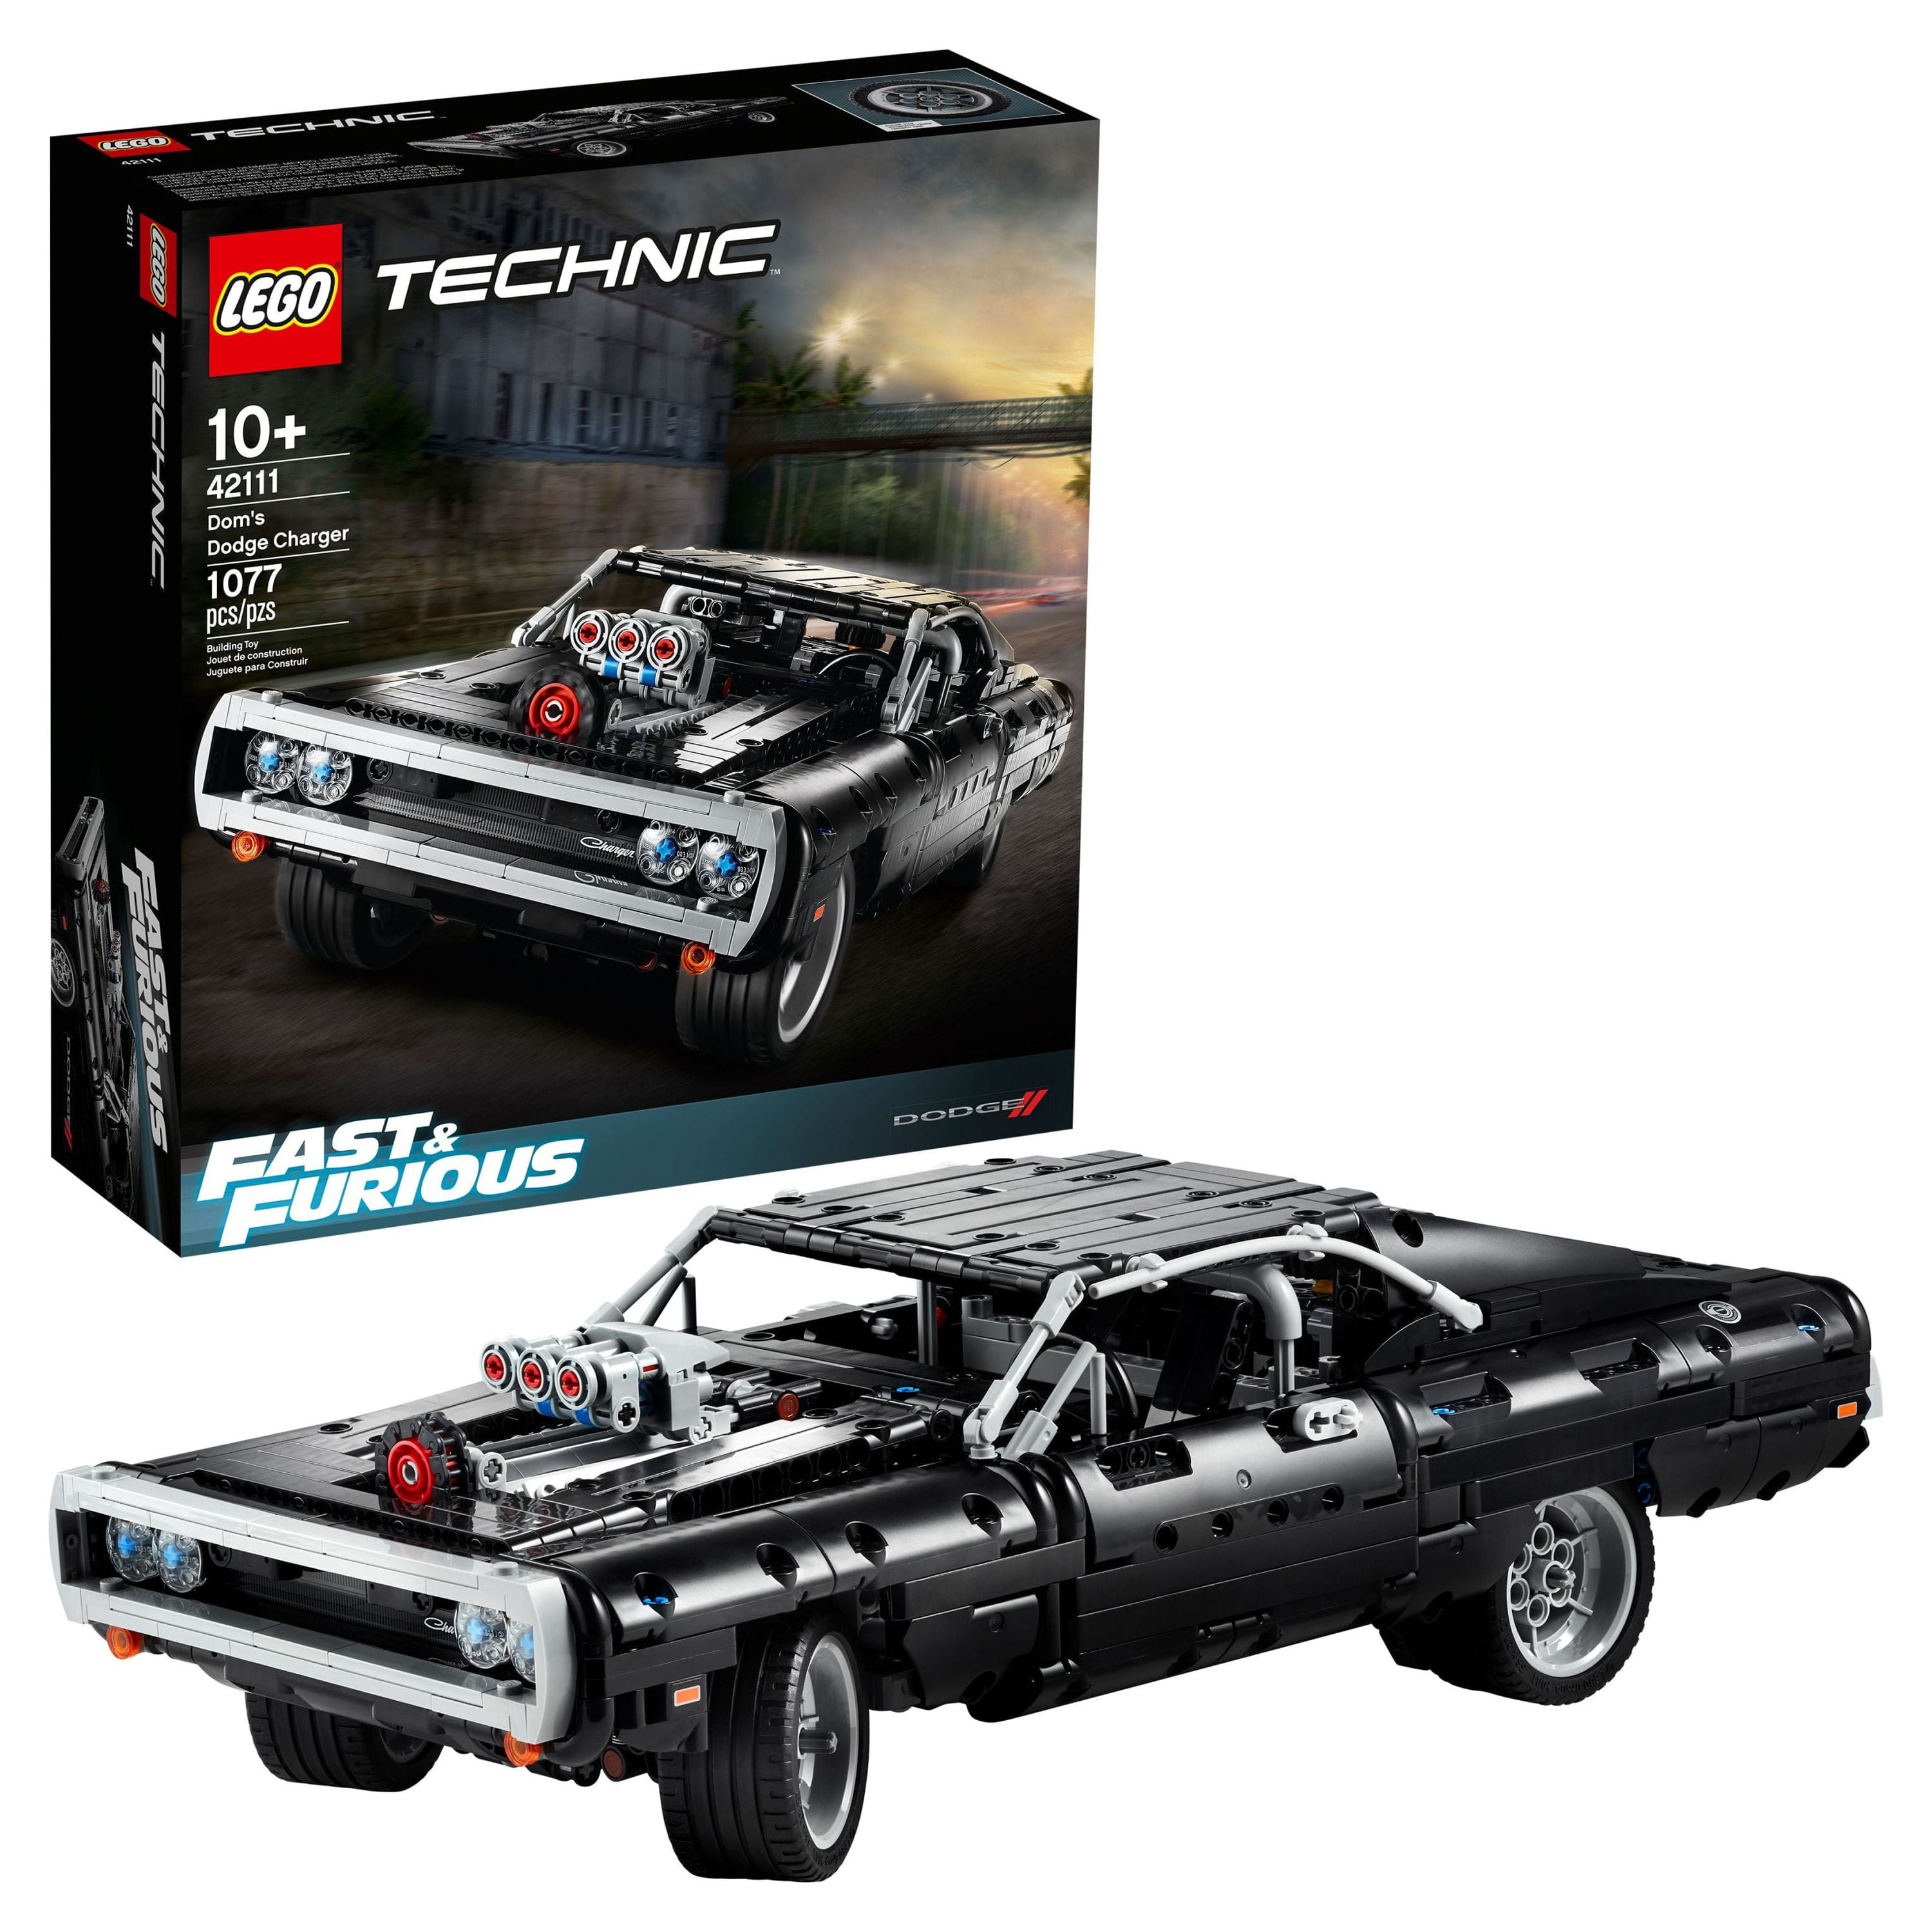 LEGO Technic Fast & Furious Dom's Dodge Charger Maroc